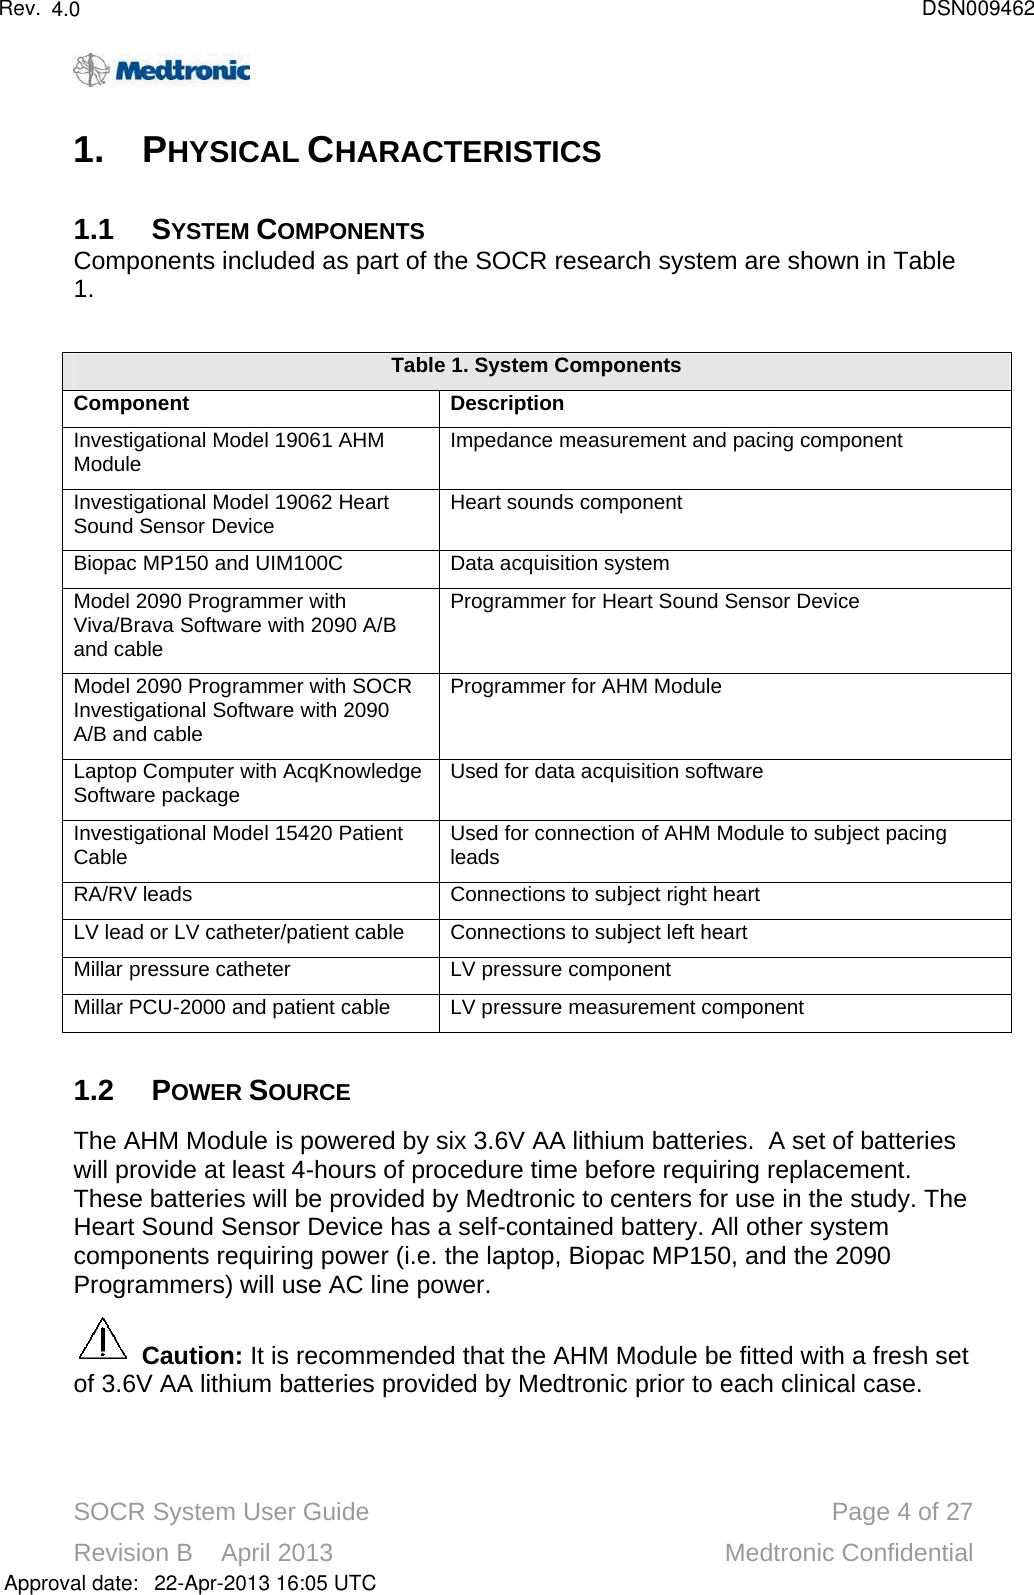 SOCR System User Guide Page 4of 27Revision B    April 2013 Medtronic Confidential1. PHYSICAL CHARACTERISTICS1.1 SYSTEM COMPONENTSComponents included as part of the SOCR research system are shown in Table1.  Table 1.System ComponentsComponentDescriptionInvestigational Model 19061 AHMModule Impedance measurement and pacing componentInvestigational Model 19062 Heart Sound Sensor Device Heart sounds componentBiopac MP150 and UIM100C Data acquisition systemModel 2090 Programmer with Viva/Brava Software with 2090 A/B and cableProgrammer for Heart Sound Sensor DeviceModel 2090 Programmer with SOCR Investigational Software with 2090 A/B and cableProgrammer for AHM ModuleLaptop Computer with AcqKnowledge Software package Used for data acquisition softwareInvestigational Model 15420 Patient Cable Used for connection of AHM Module to subject pacing leadsRA/RV leads Connections to subject right heartLV lead or LV catheter/patient cable Connections to subject left heartMillar pressure catheter LV pressure componentMillar PCU-2000 and patient cable LV pressure measurement component1.2 POWER SOURCEThe AHM Module is powered by six 3.6V AA lithium batteries.  A set of batteries will provide at least 4-hours of procedure time before requiring replacement.  These batteries will be provided by Medtronic to centers for use in the study. The Heart Sound Sensor Device has a self-contained battery. All other system components requiring power (i.e. the laptop, Biopac MP150, and the 2090 Programmers) will use AC line power.Caution: It is recommended that the AHM Module be fitted with a fresh set of 3.6V AA lithium batteries provided by Medtronic prior to each clinical case.Approval date:4.0 DSN00946222-Apr-2013 16:05 UTCRev.